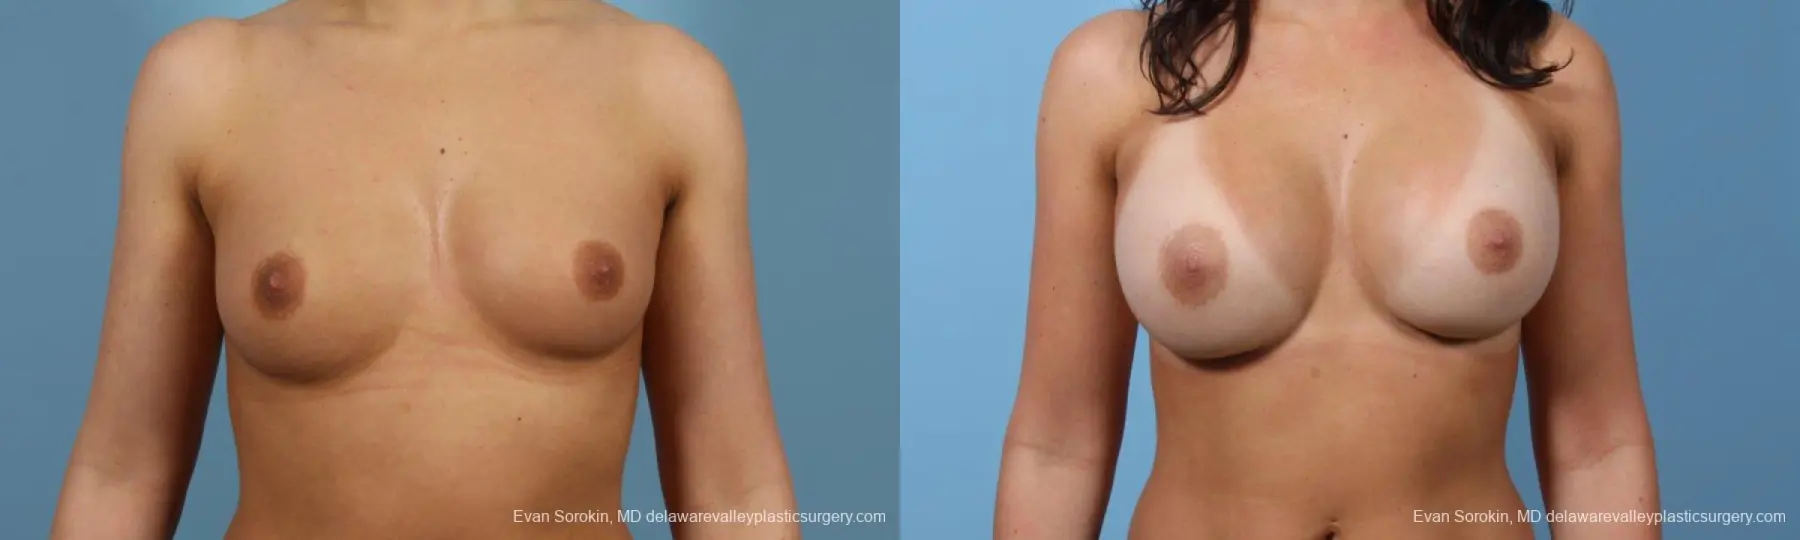 Philadelphia Breast Augmentation 8643 - Before and After